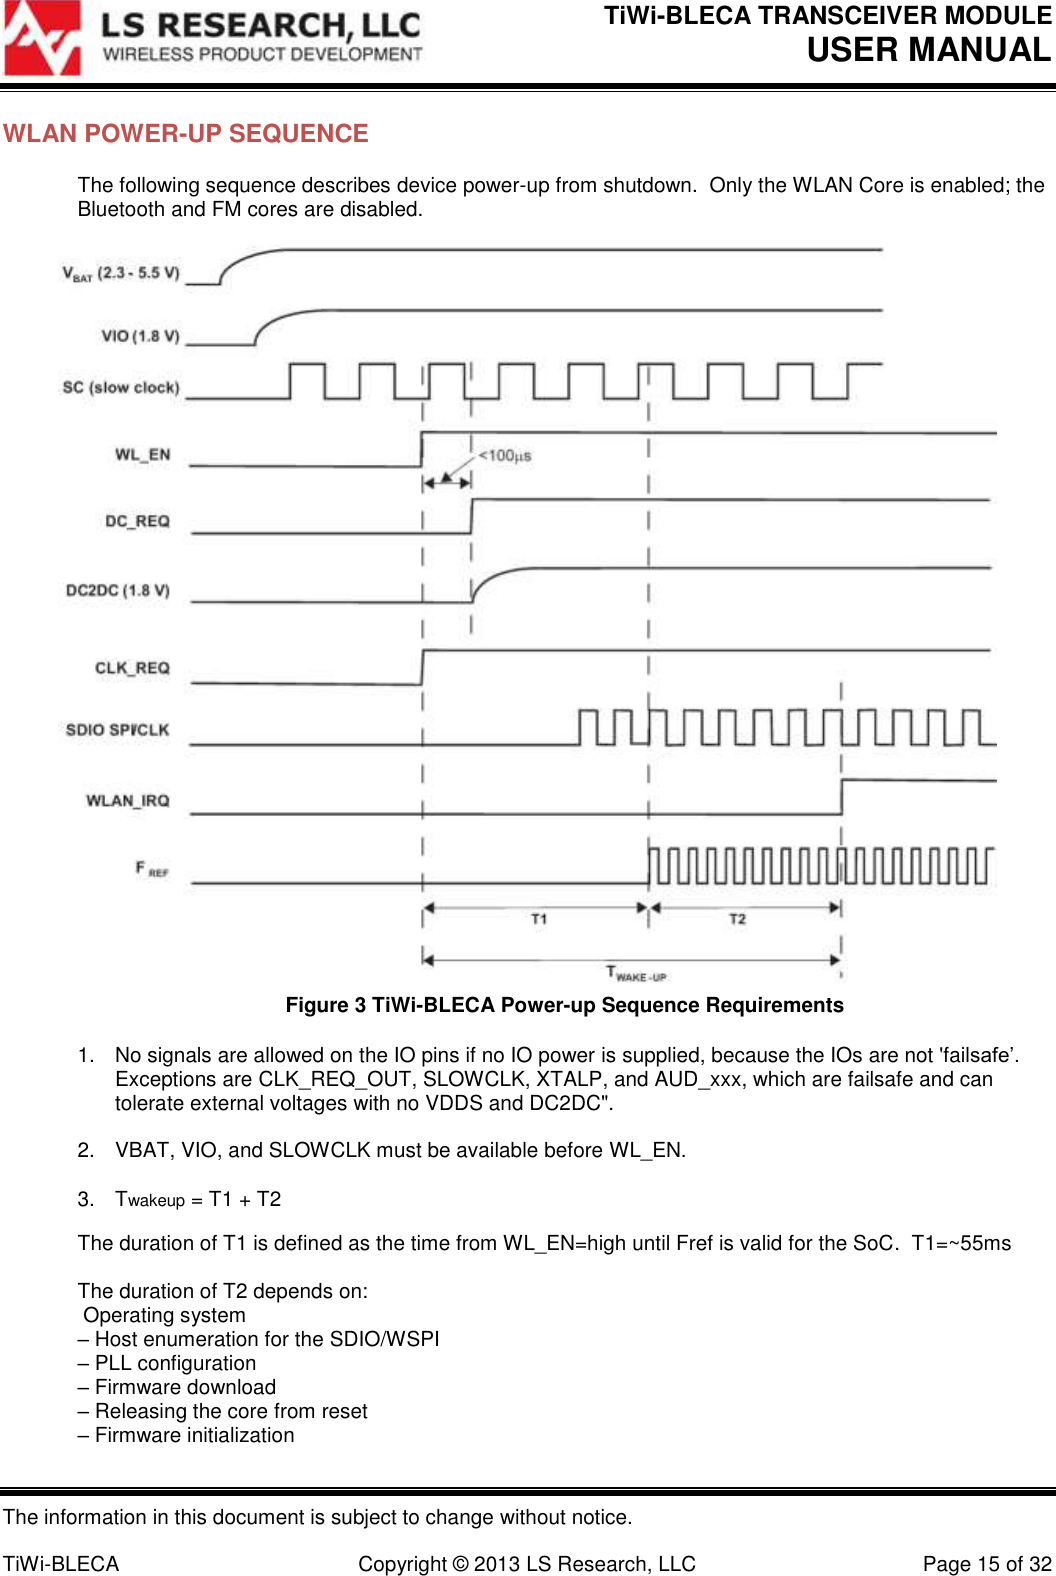 TiWi-BLECA TRANSCEIVER MODULE USER MANUAL   The information in this document is subject to change without notice.  TiWi-BLECA  Copyright © 2013 LS Research, LLC  Page 15 of 32 WLAN POWER-UP SEQUENCE The following sequence describes device power-up from shutdown.  Only the WLAN Core is enabled; the Bluetooth and FM cores are disabled.   Figure 3 TiWi-BLECA Power-up Sequence Requirements 1.  No signals are allowed on the IO pins if no IO power is supplied, because the IOs are not &apos;failsafe’. Exceptions are CLK_REQ_OUT, SLOWCLK, XTALP, and AUD_xxx, which are failsafe and can tolerate external voltages with no VDDS and DC2DC&quot;.  2.  VBAT, VIO, and SLOWCLK must be available before WL_EN.  3.  Twakeup = T1 + T2 The duration of T1 is defined as the time from WL_EN=high until Fref is valid for the SoC.  T1=~55ms  The duration of T2 depends on:  Operating system – Host enumeration for the SDIO/WSPI – PLL configuration – Firmware download – Releasing the core from reset – Firmware initialization 